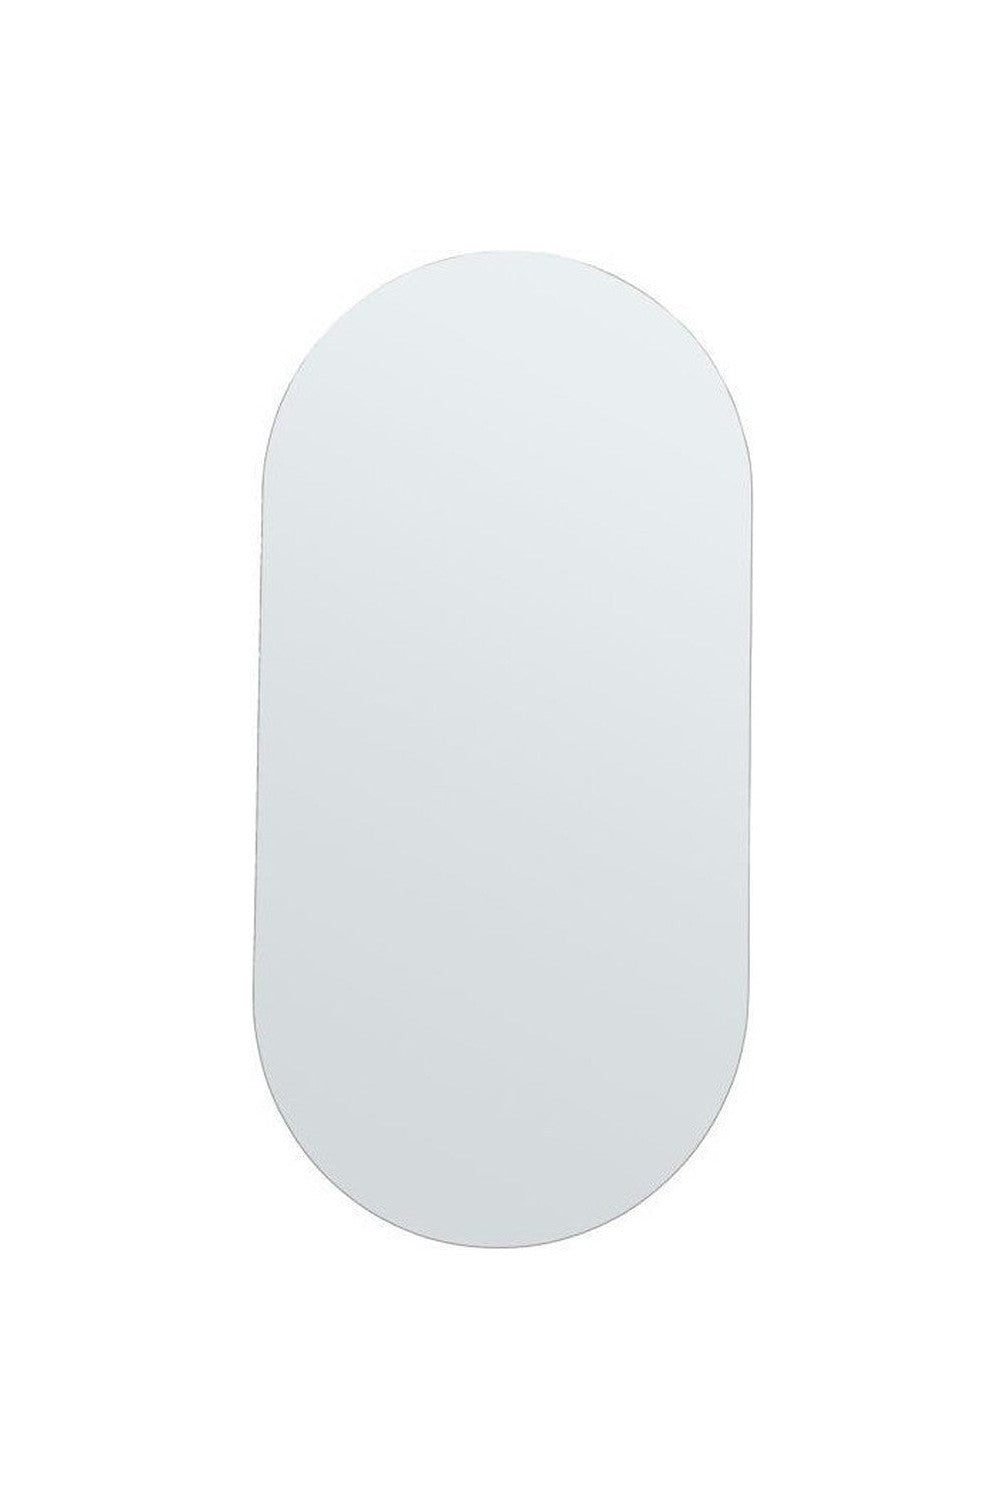 House Doctor Mirror, HDWalls, Clear